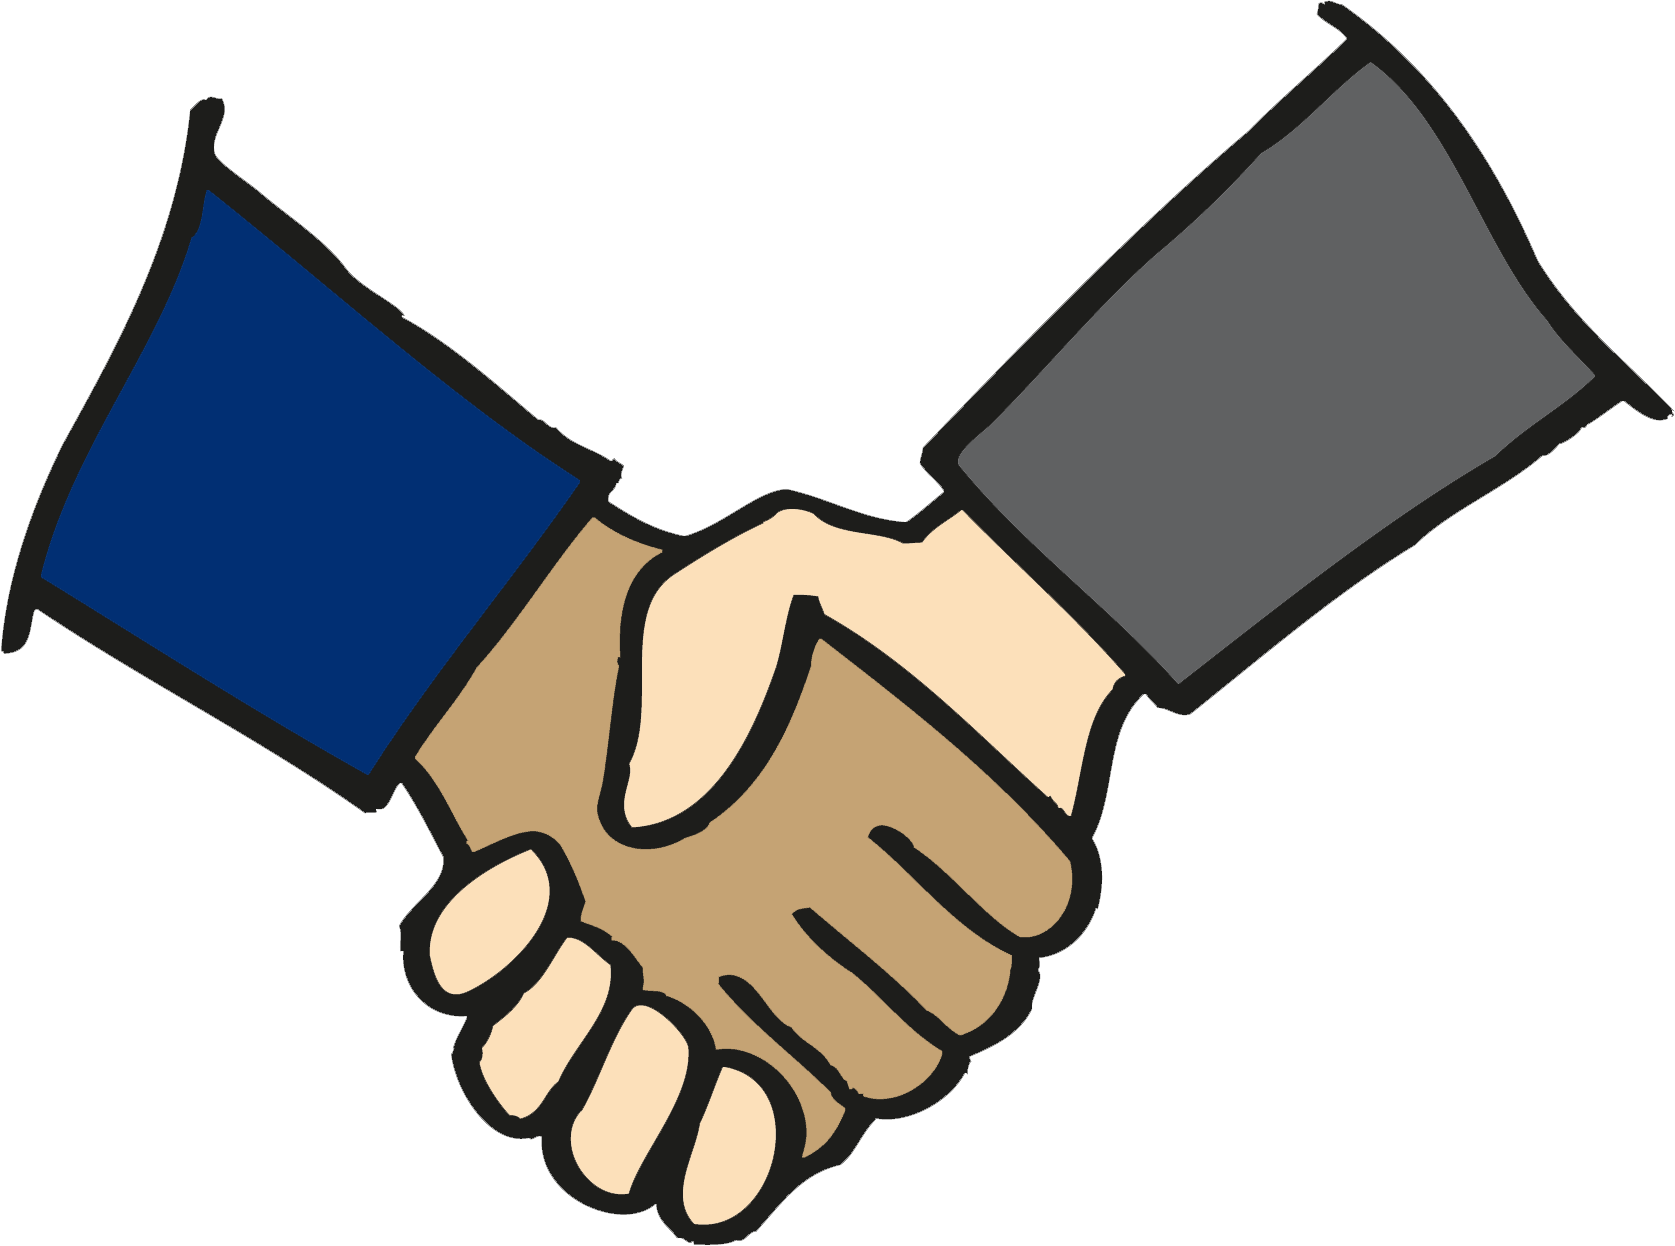 Two hands clasped color. Handshake clipart equality